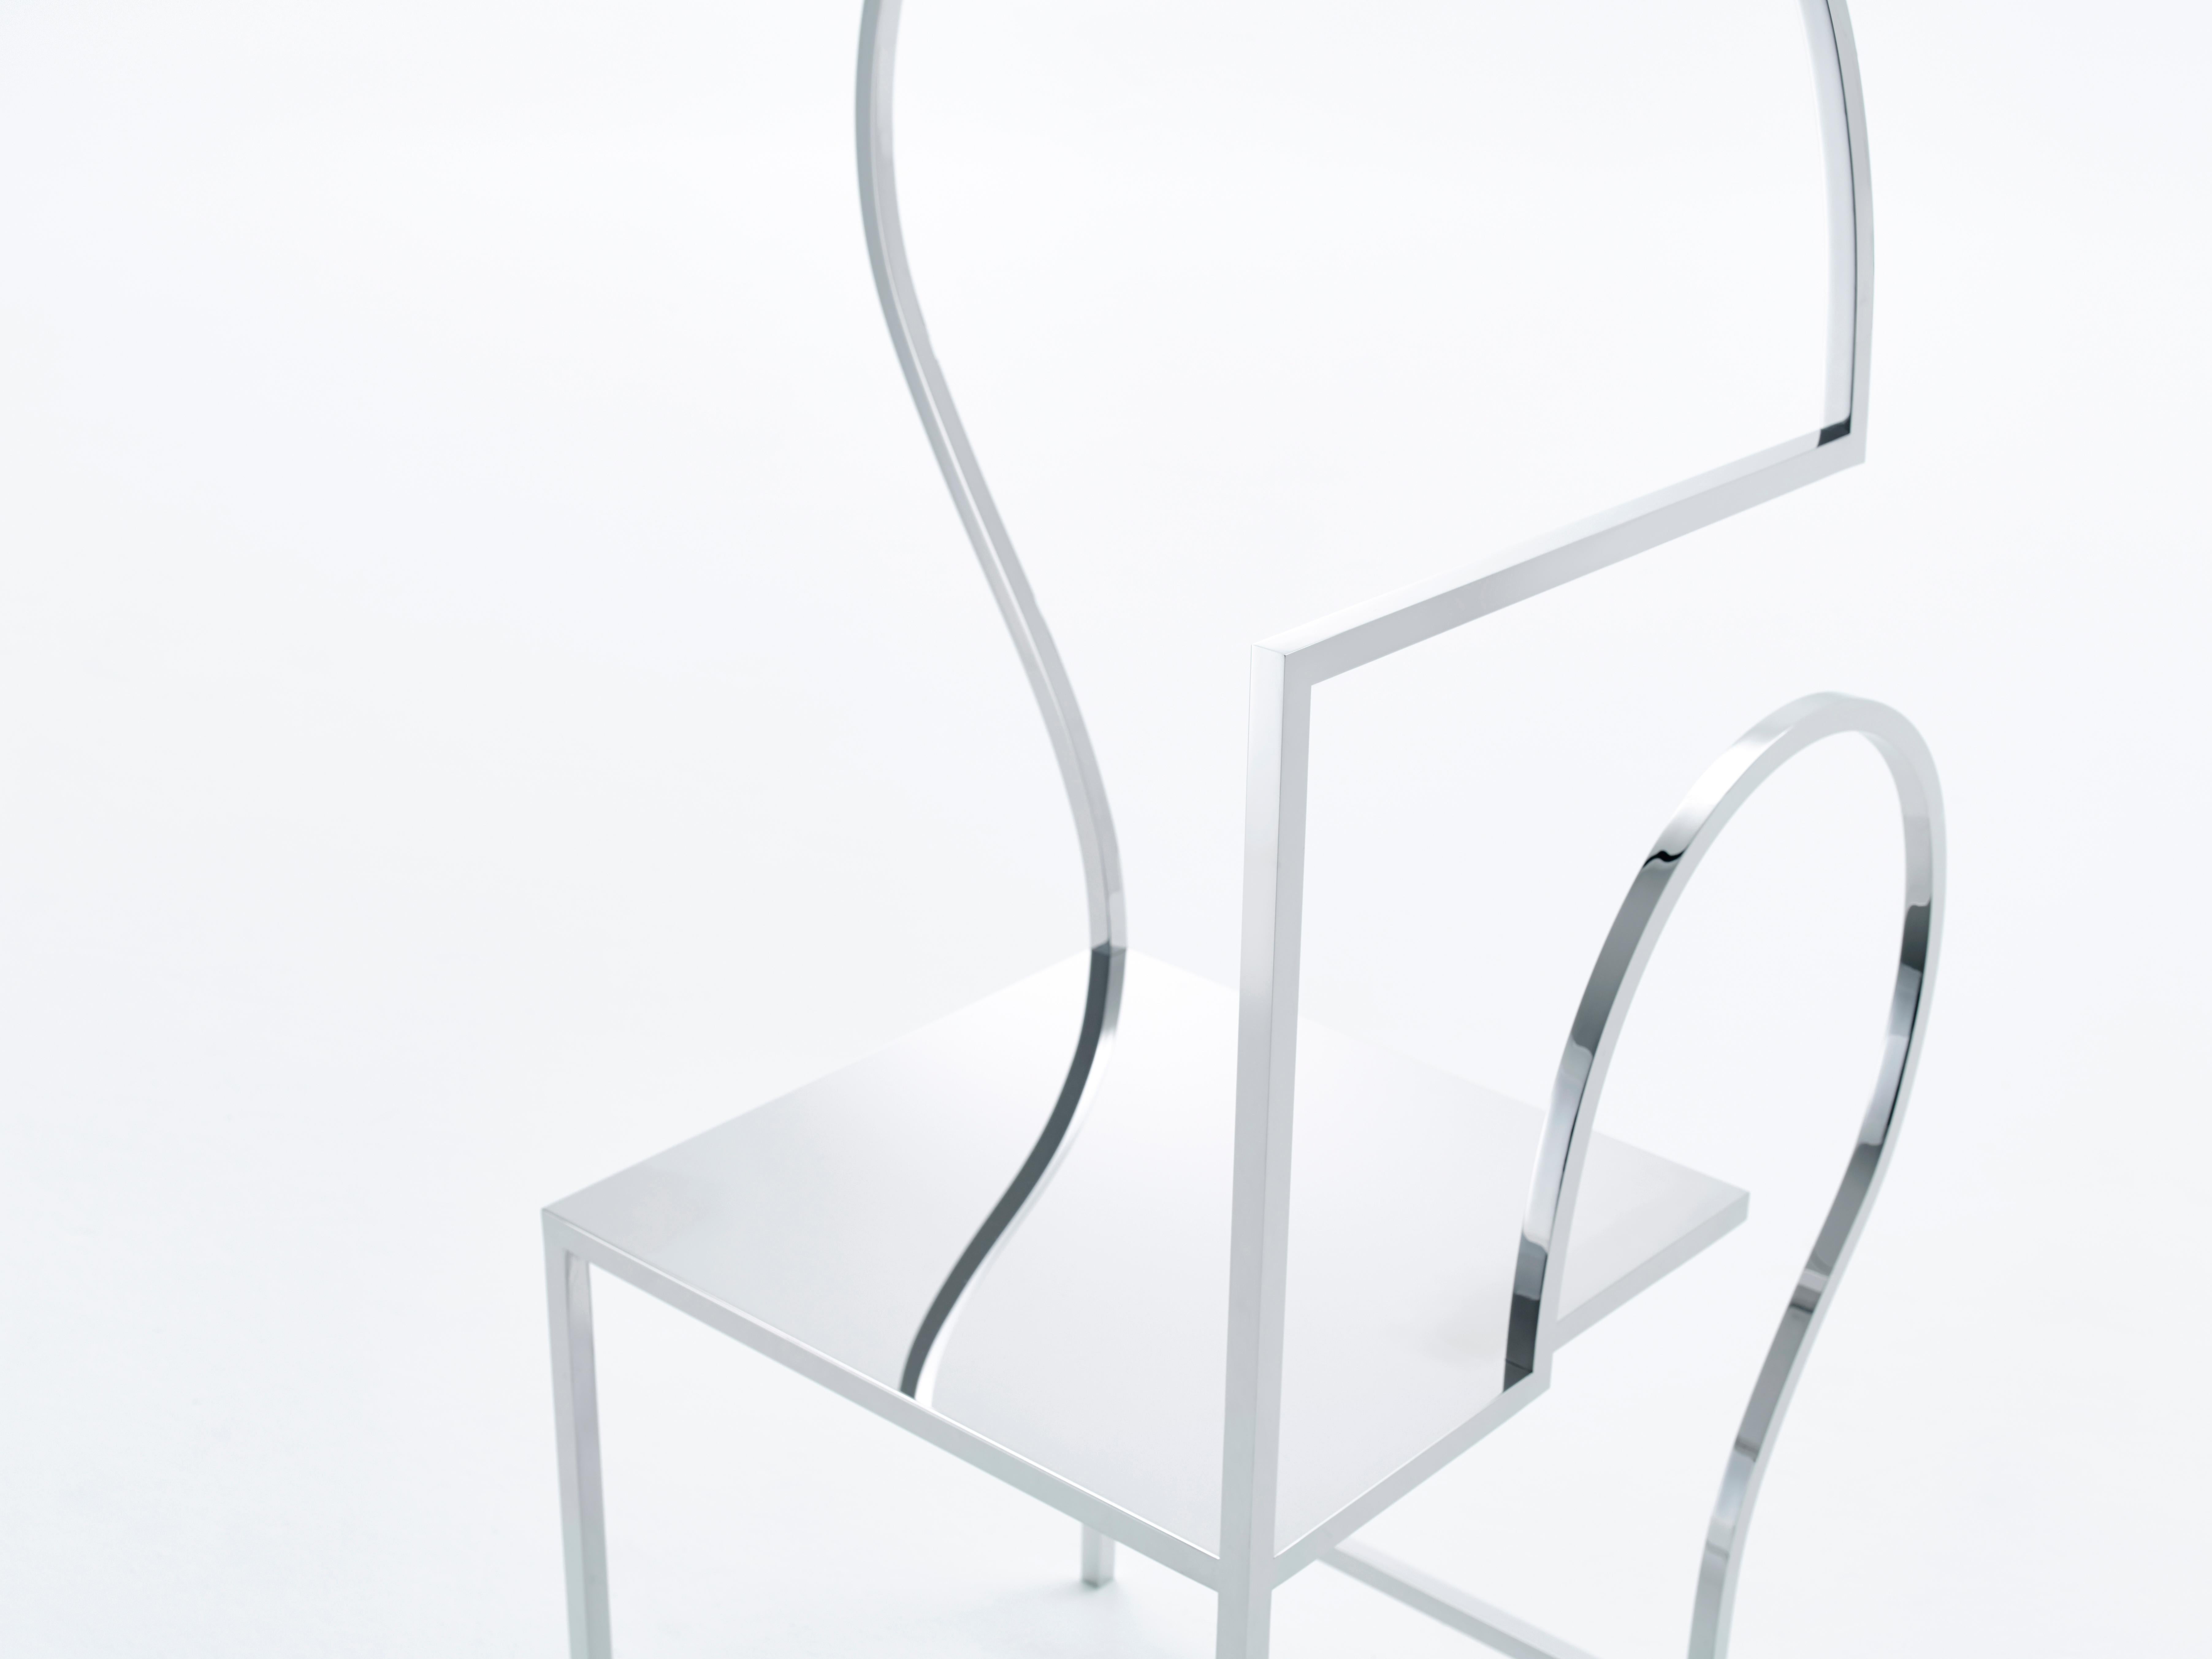 Manga chair (03), 2015
Stainless ateel
Measures: 46.25 x 22 x 24.5 inches
117.3 x 55.8 x 62.2 cm

Founded in Tokyo in 2002, with a second office established in Milan in 2005, nendo has received many distinctions, including the Iconic Design